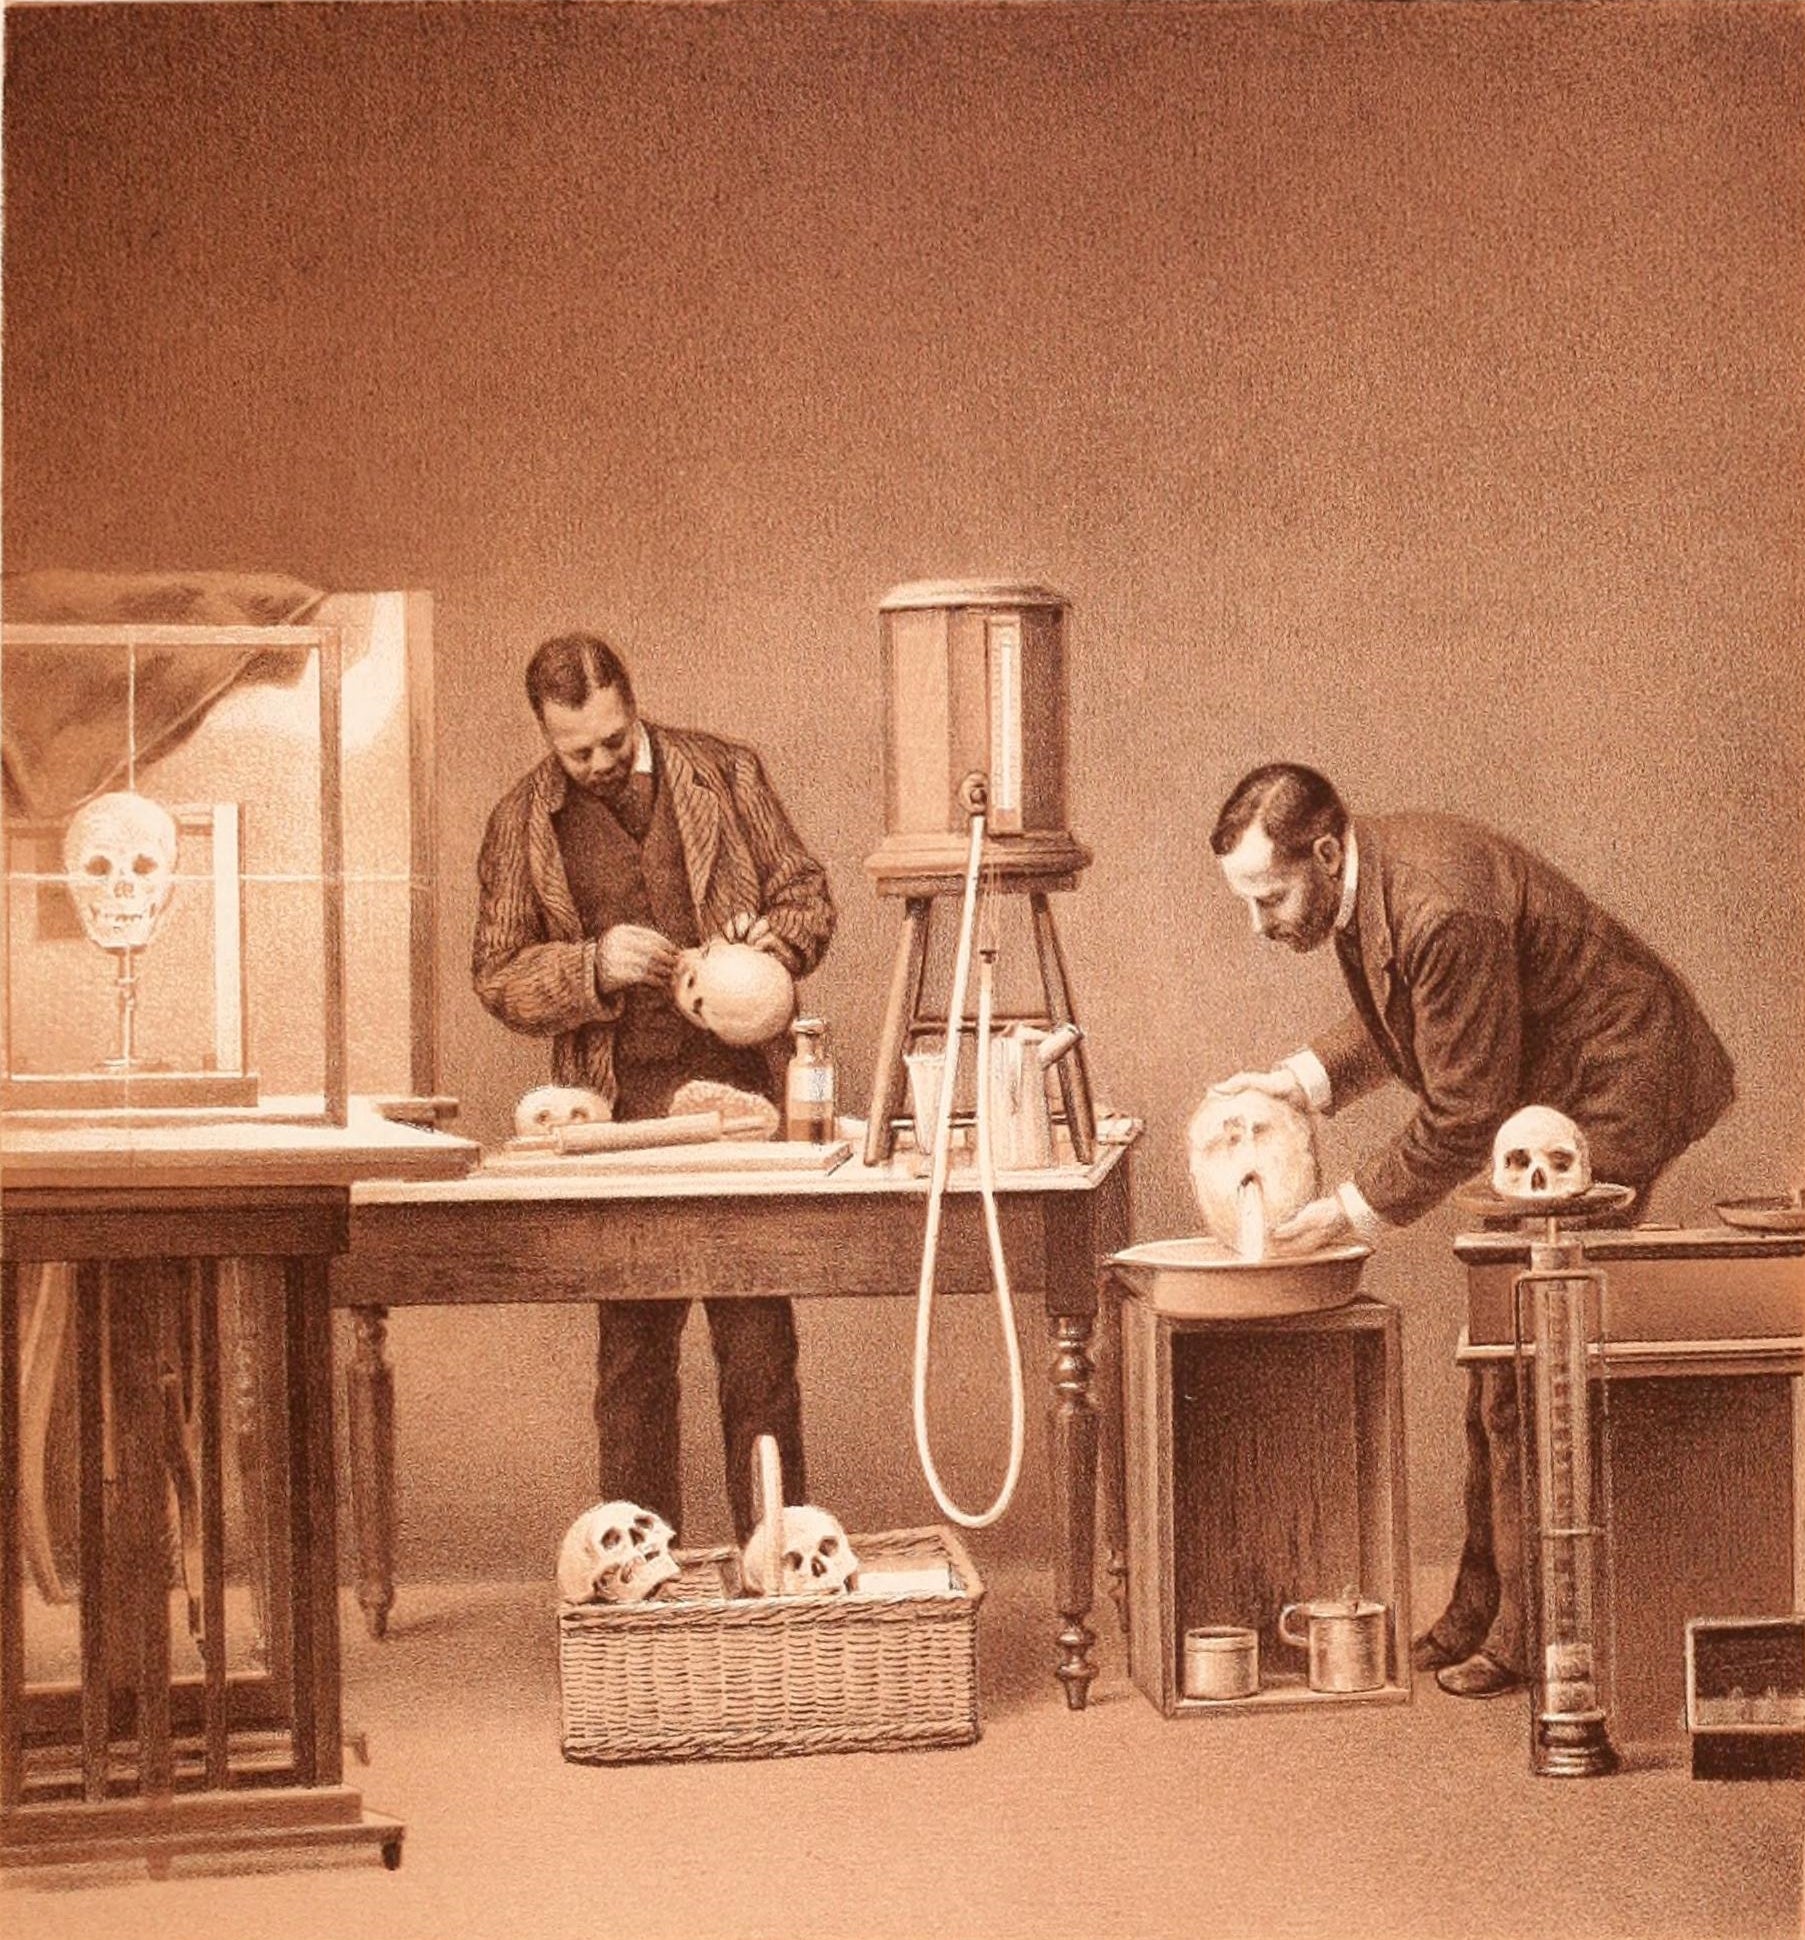 Photograph of 2 people measuring and working with skulls.